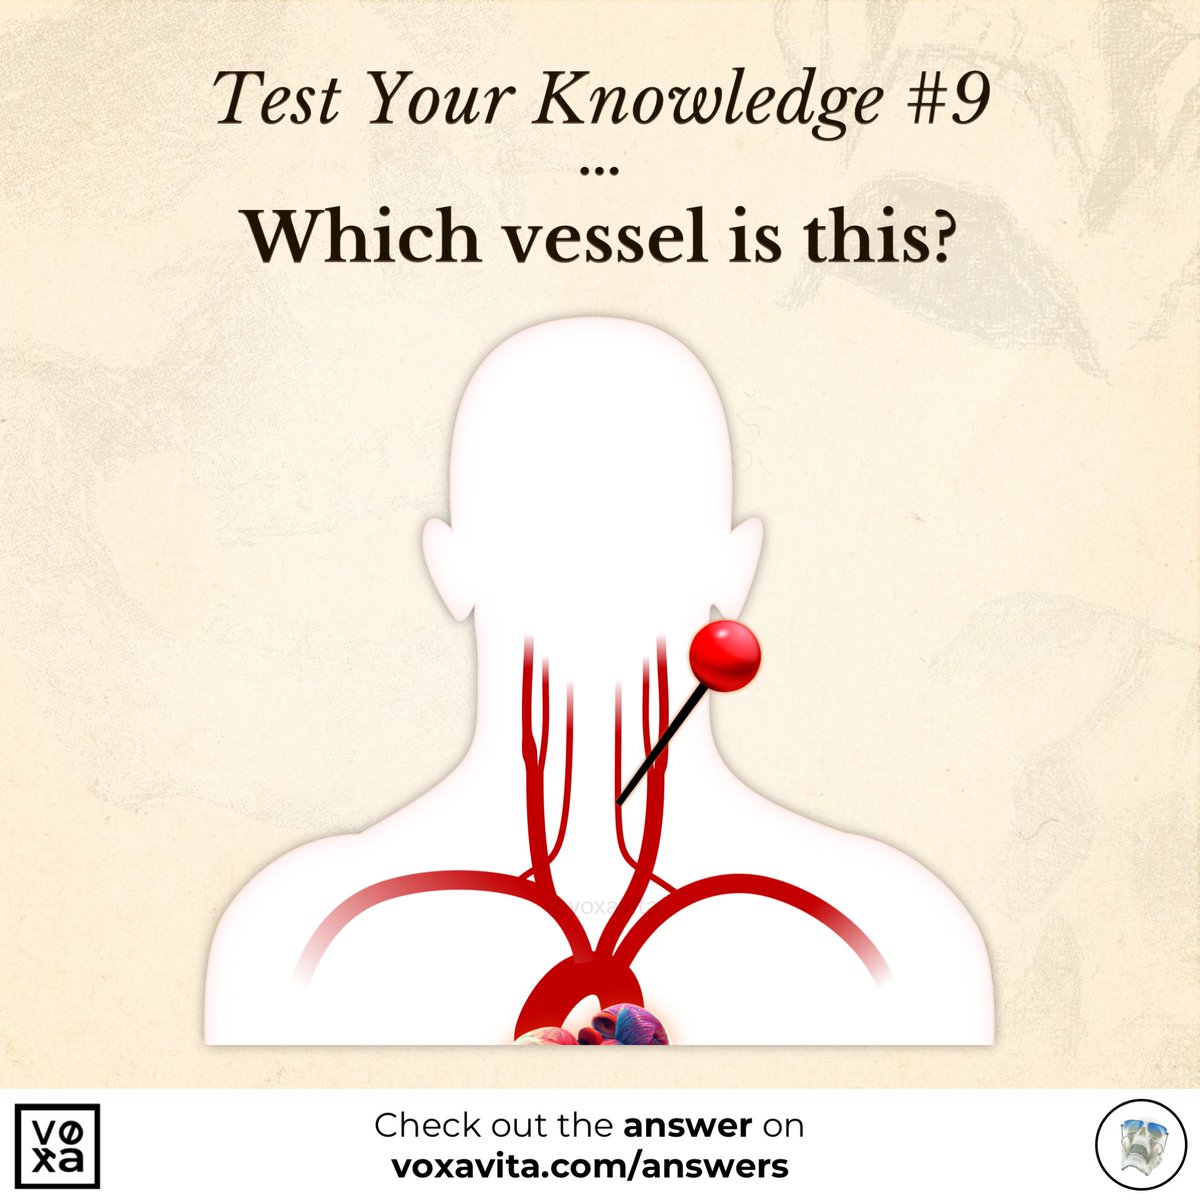 🩺 Place your answer in the replies! ✍️

Our #BasalGanglia anatomy and physiology tutorial is out NOW! 💯🥳 youtu.be/Qo2IcI9CW3c

Answers at voxavita.com/answers

#FOAMed #MedEd #MedTwitter #MedStudentTwitter #Residency #Neuroscience #Neurology #Anatomy #MCAT #USMLE #MCCQE